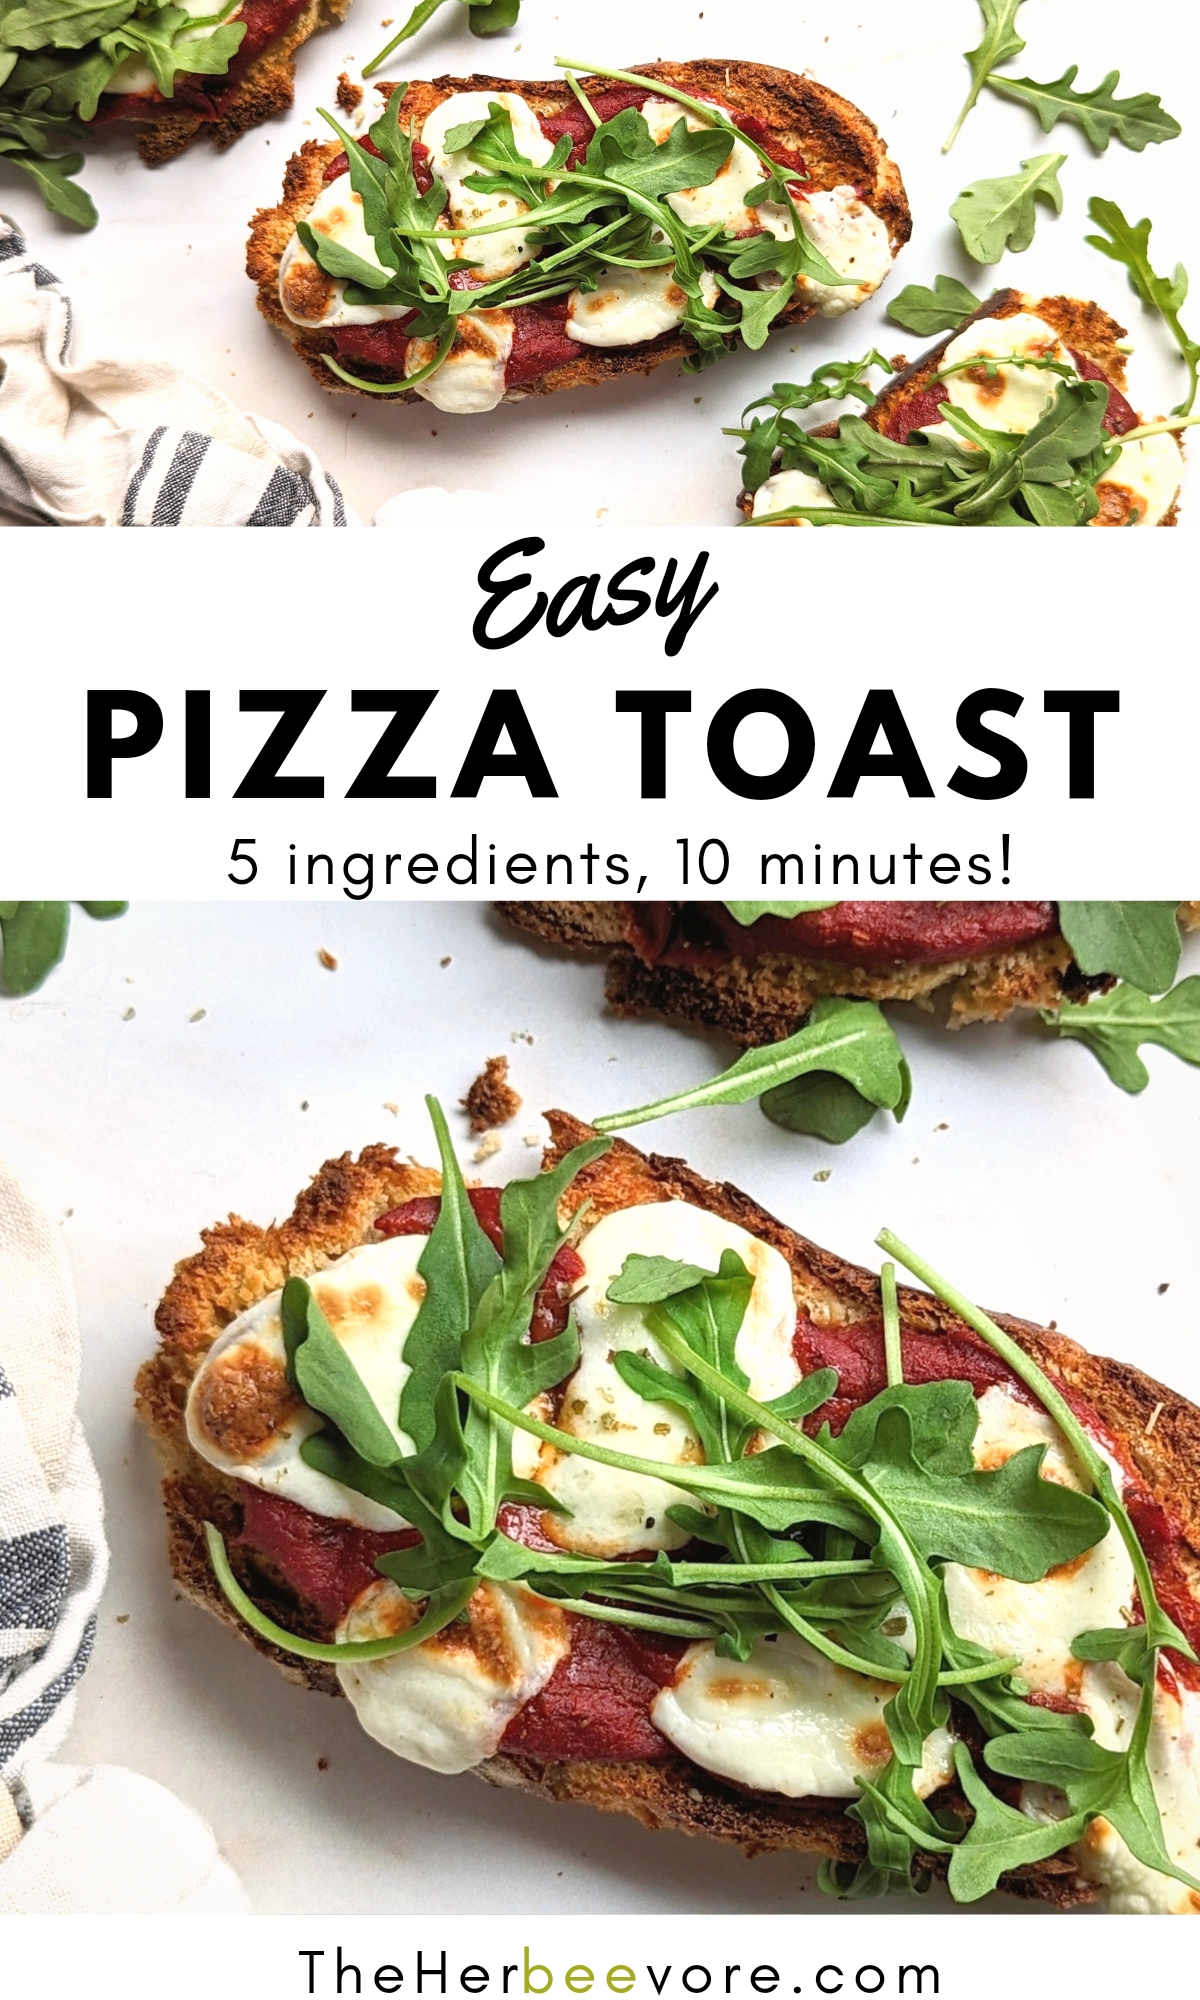 easy pizza toast recipe vegetarian pizza toastie ideas healthy pizza toast without meat